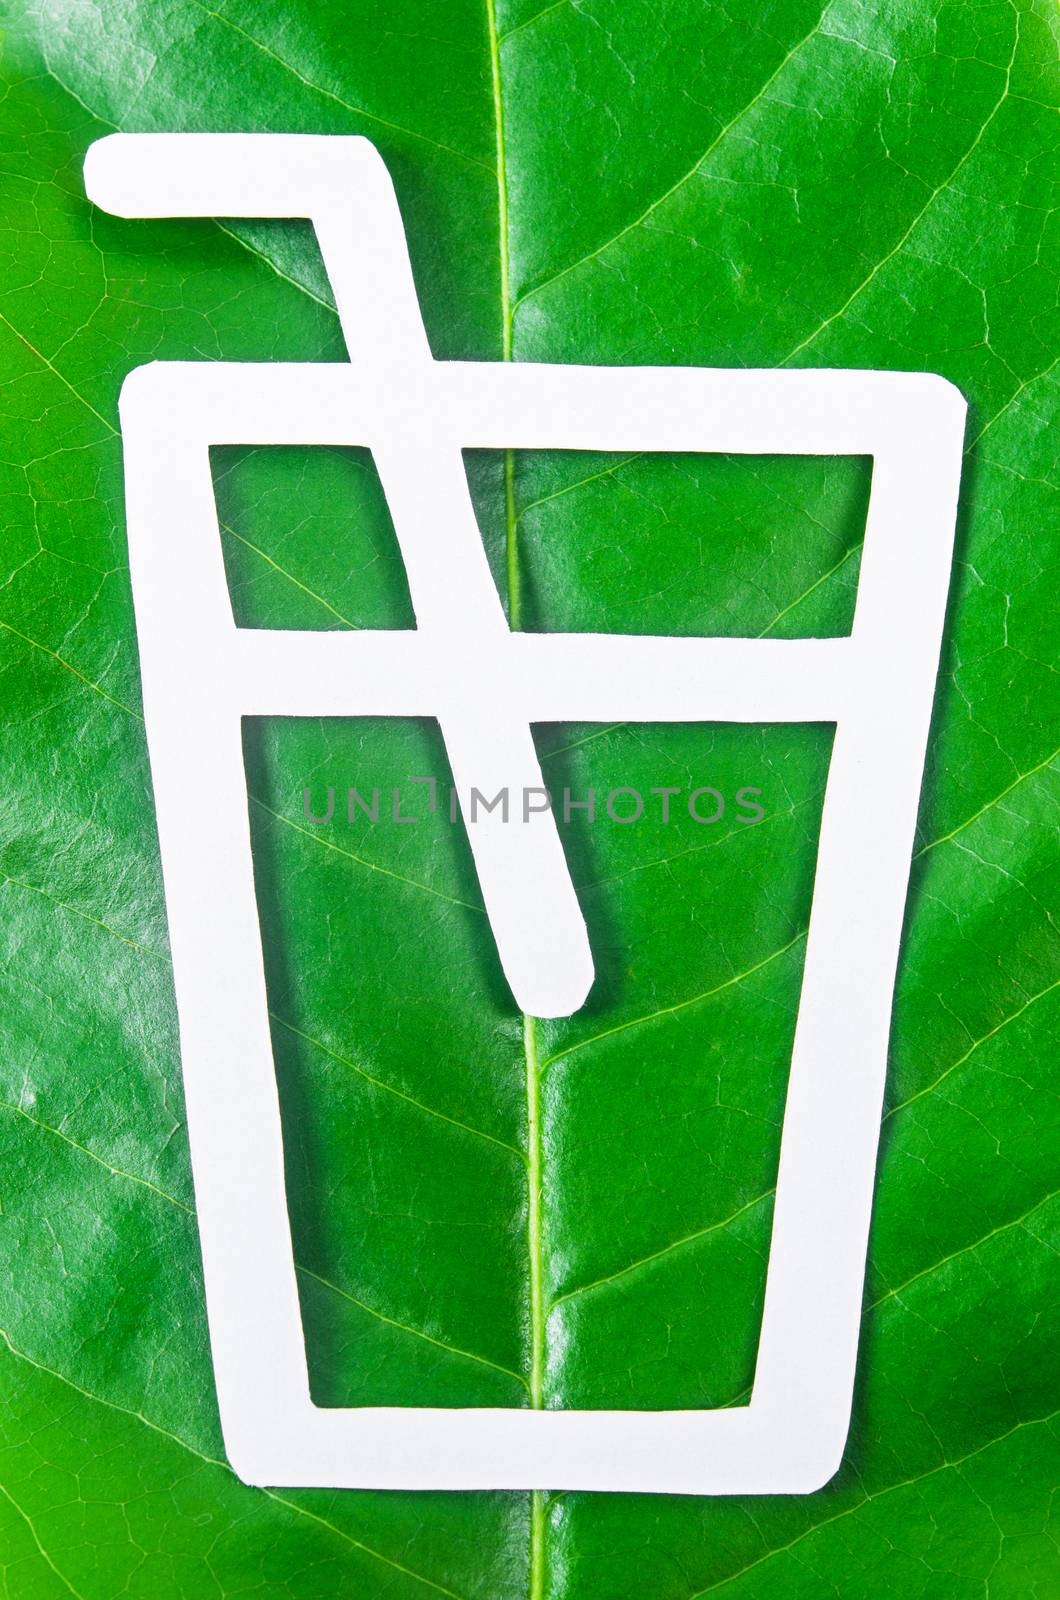 glass ans straw made from paper cut out on leaf green tree. Biodegradable package concept.